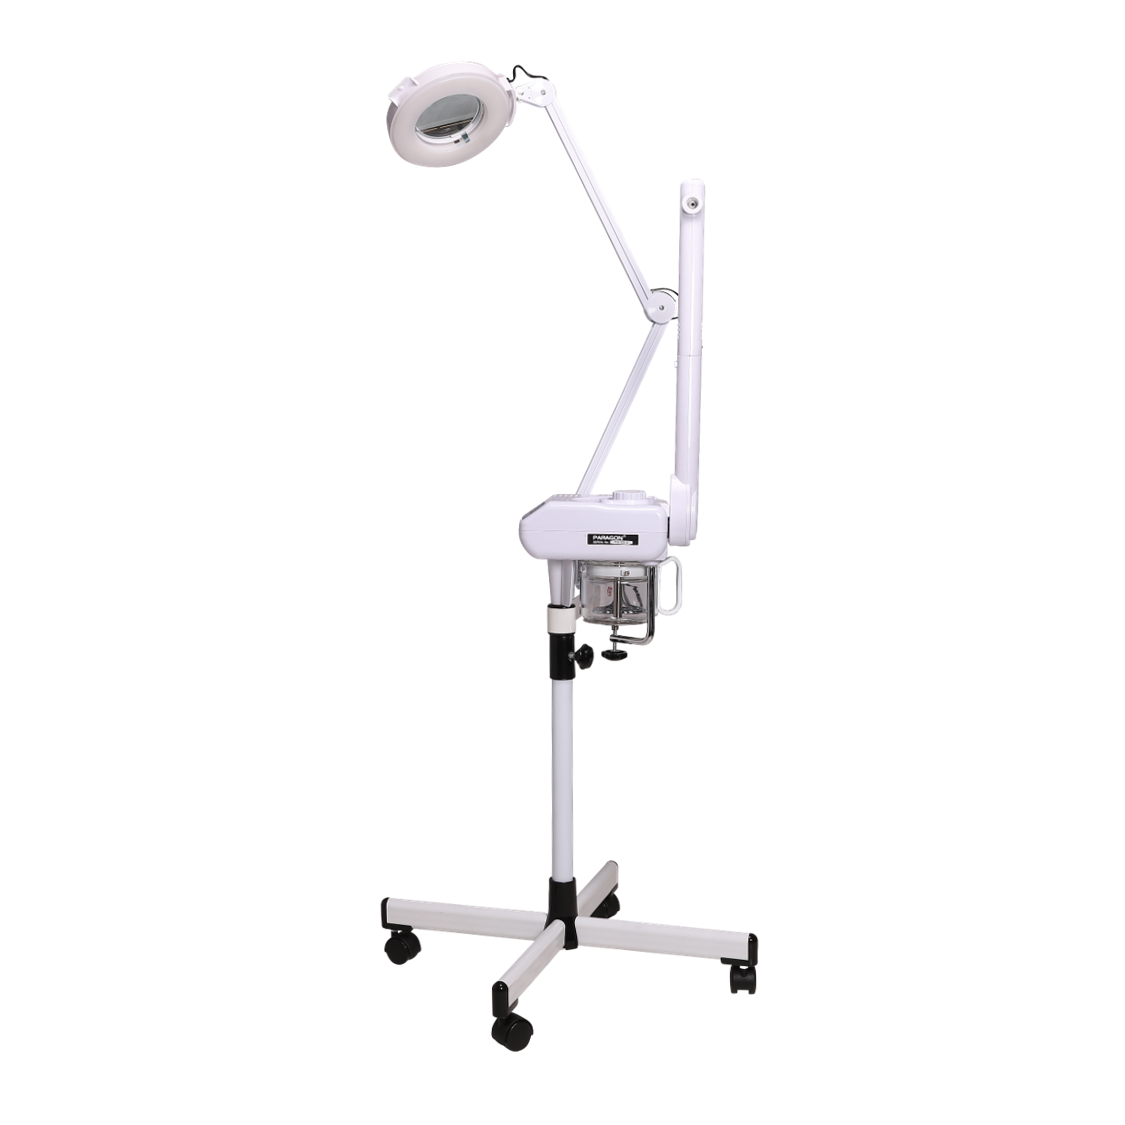 facial steamer professional facial vaporizers mag lamp combo magnification rollerbase rollerstand stand made in America